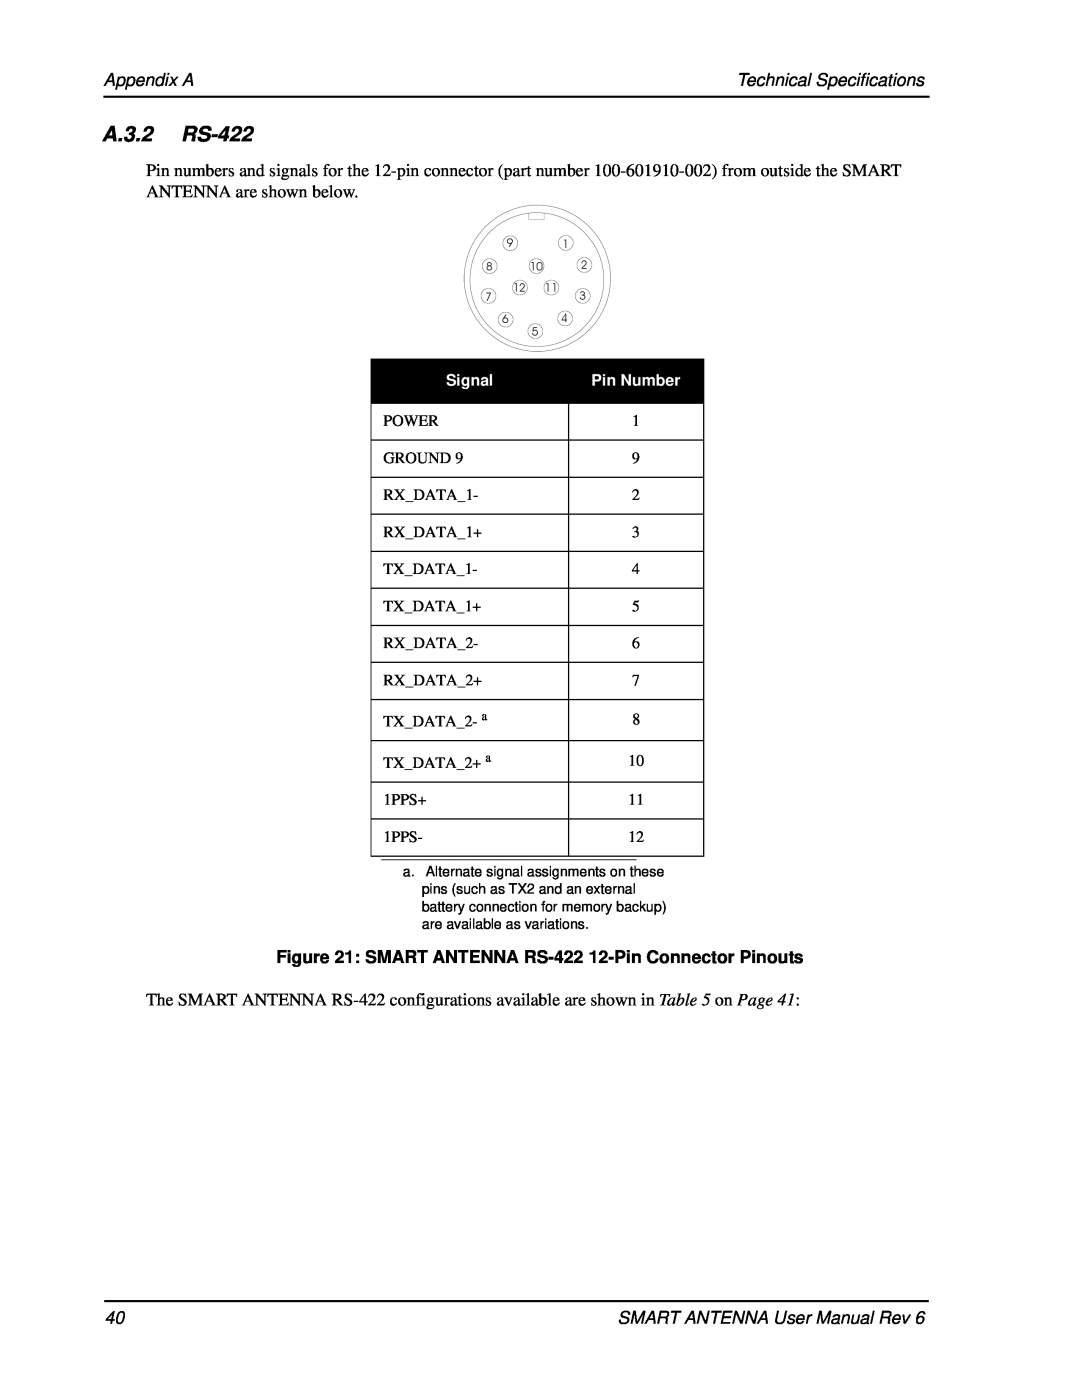 Novatel SMART ANTENNA user manual A.3.2 RS-422, Appendix A, Technical Specifications 